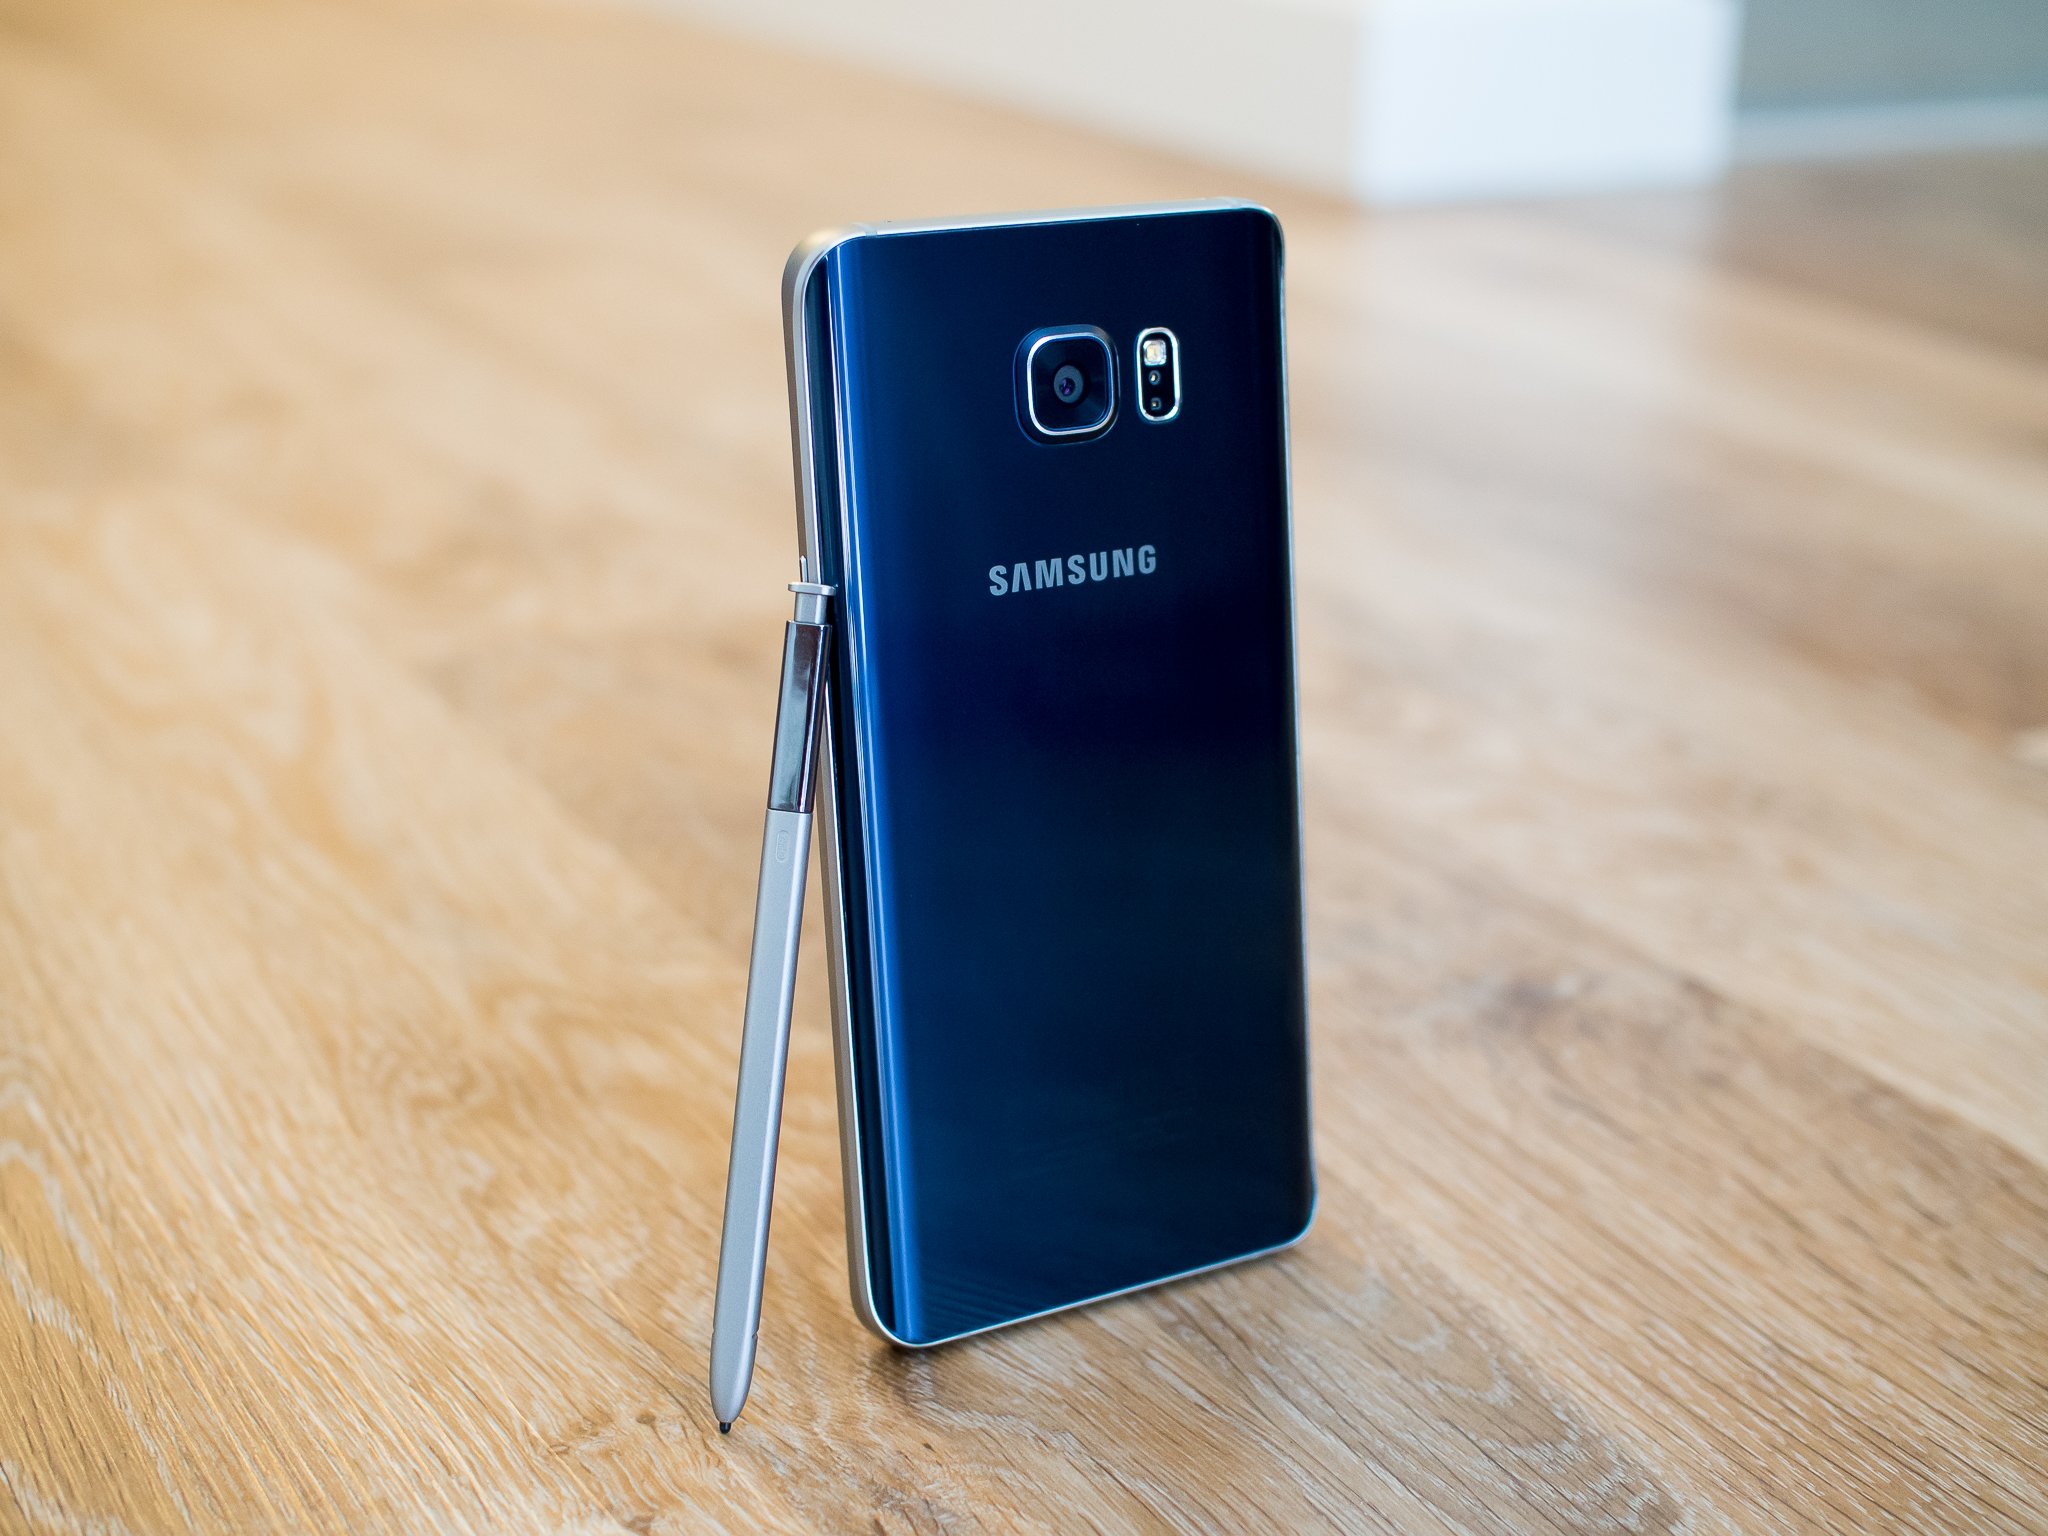 Samsung Galaxy Note 5 and S Pen